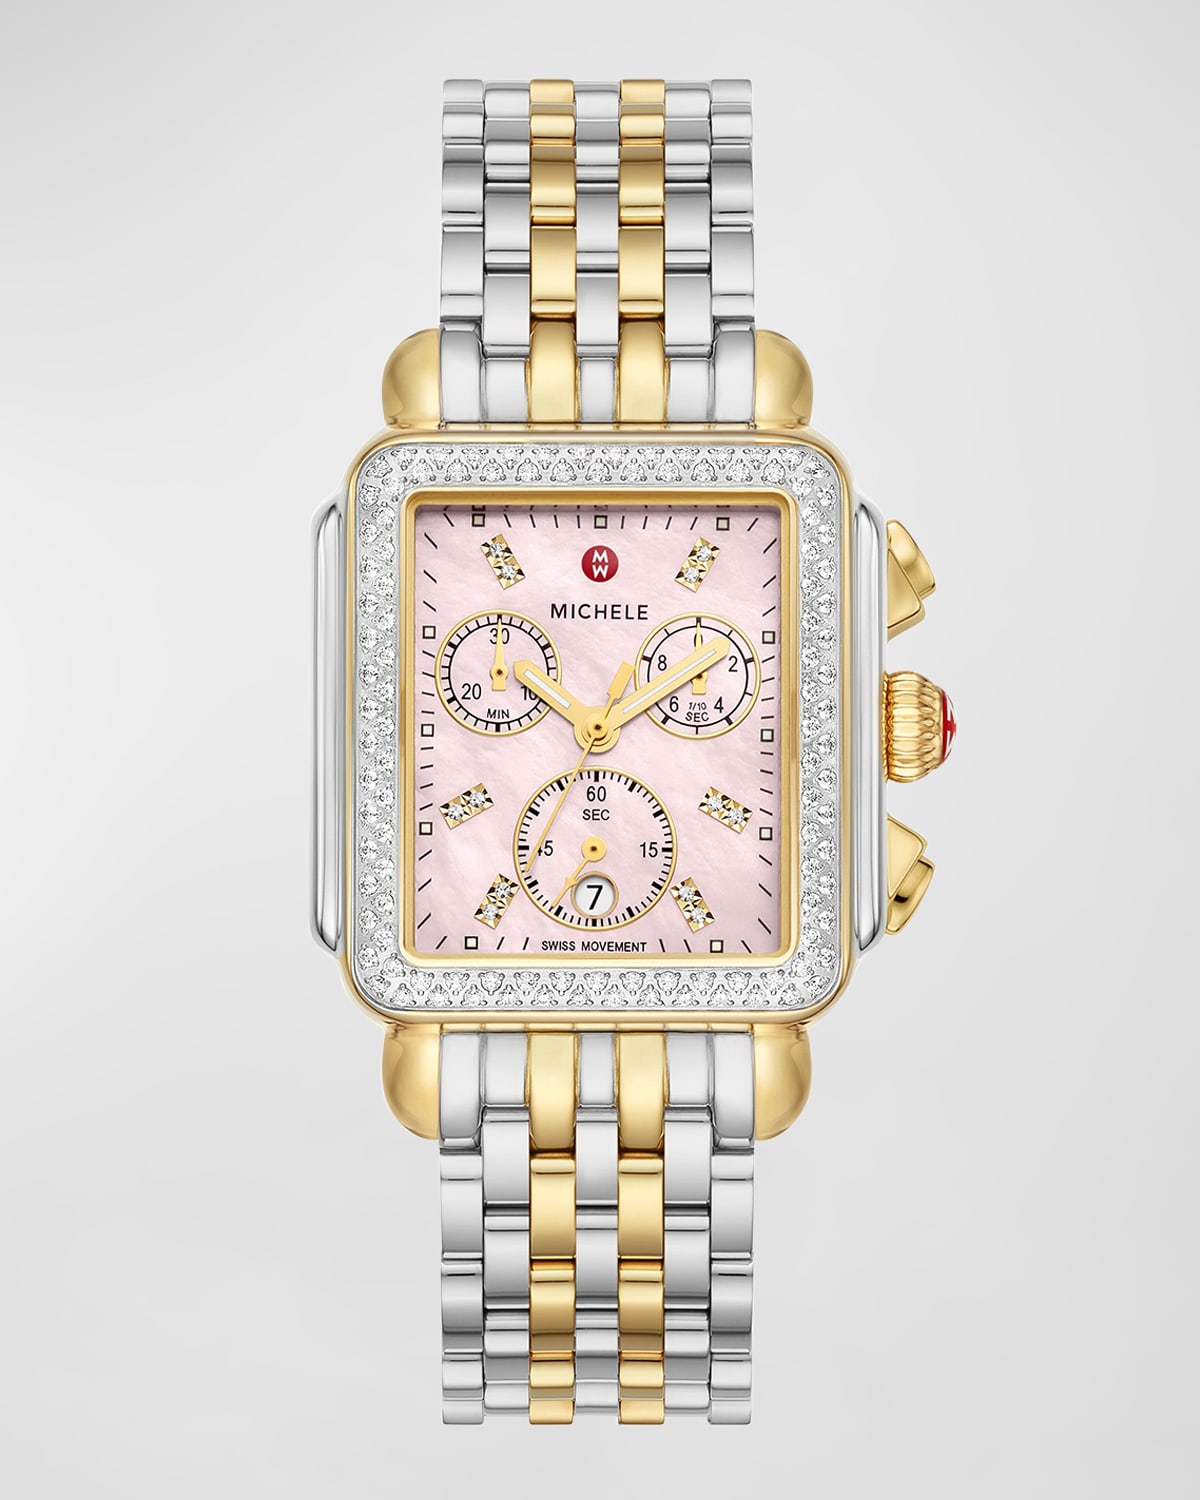 33mm Deco Diamond Two-Tone Bracelet Watch in Country Rose